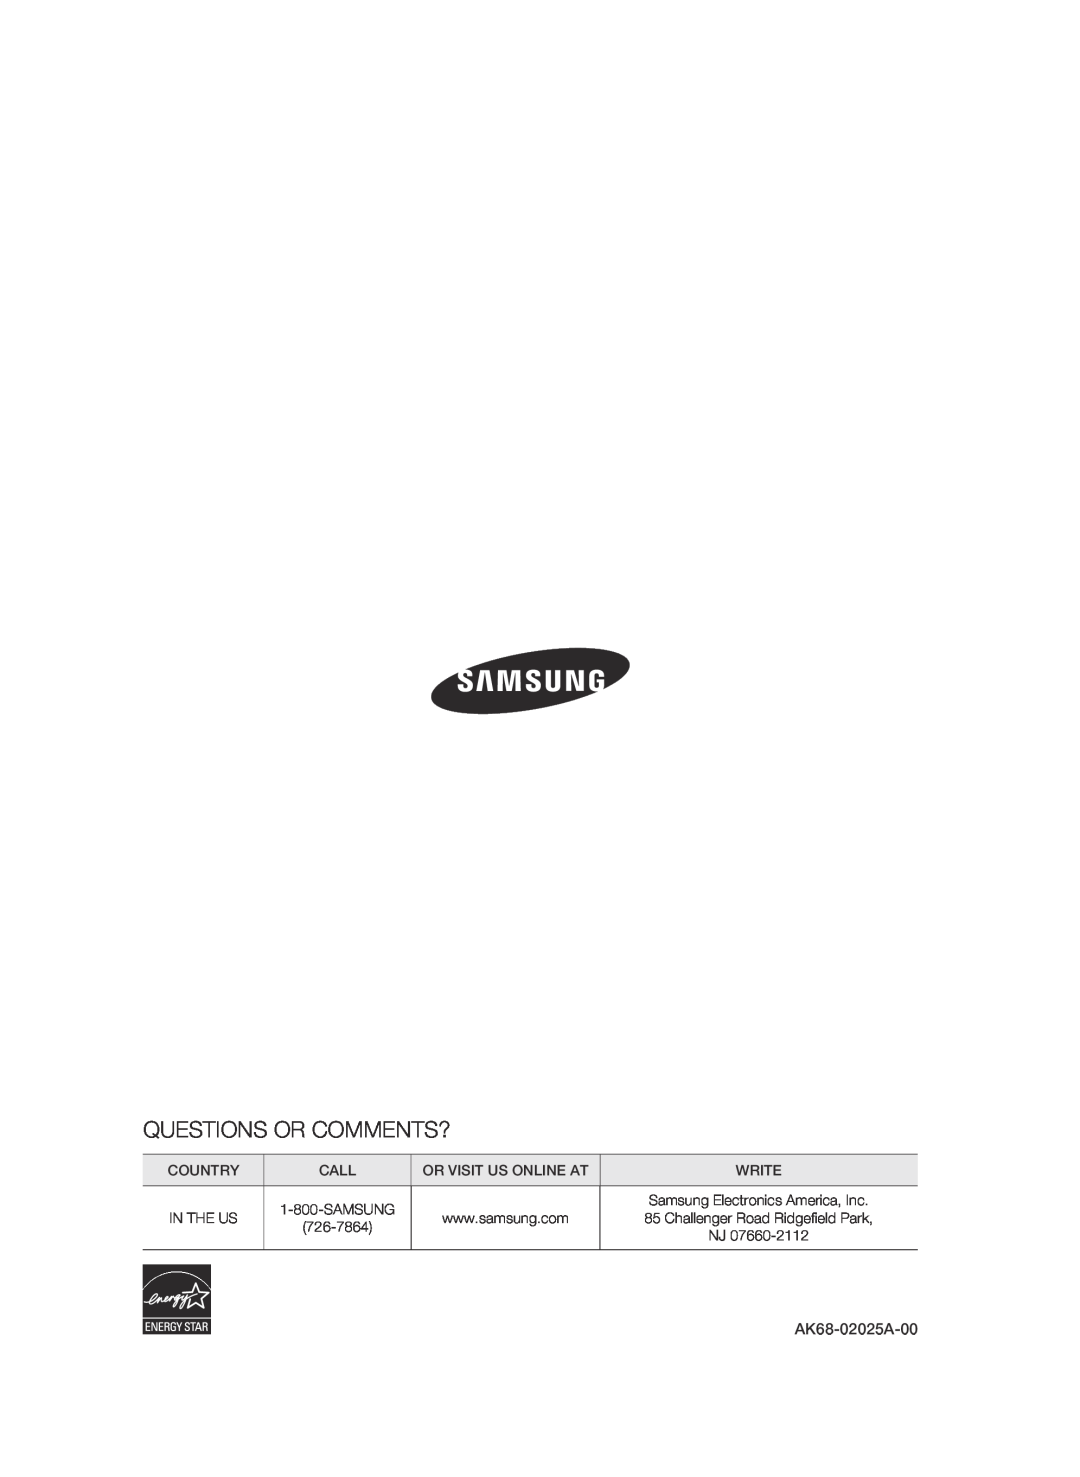 Samsung BD-D6500 user manual Questions Or Comments?, Country, In The Us, AK68-02025A-00 